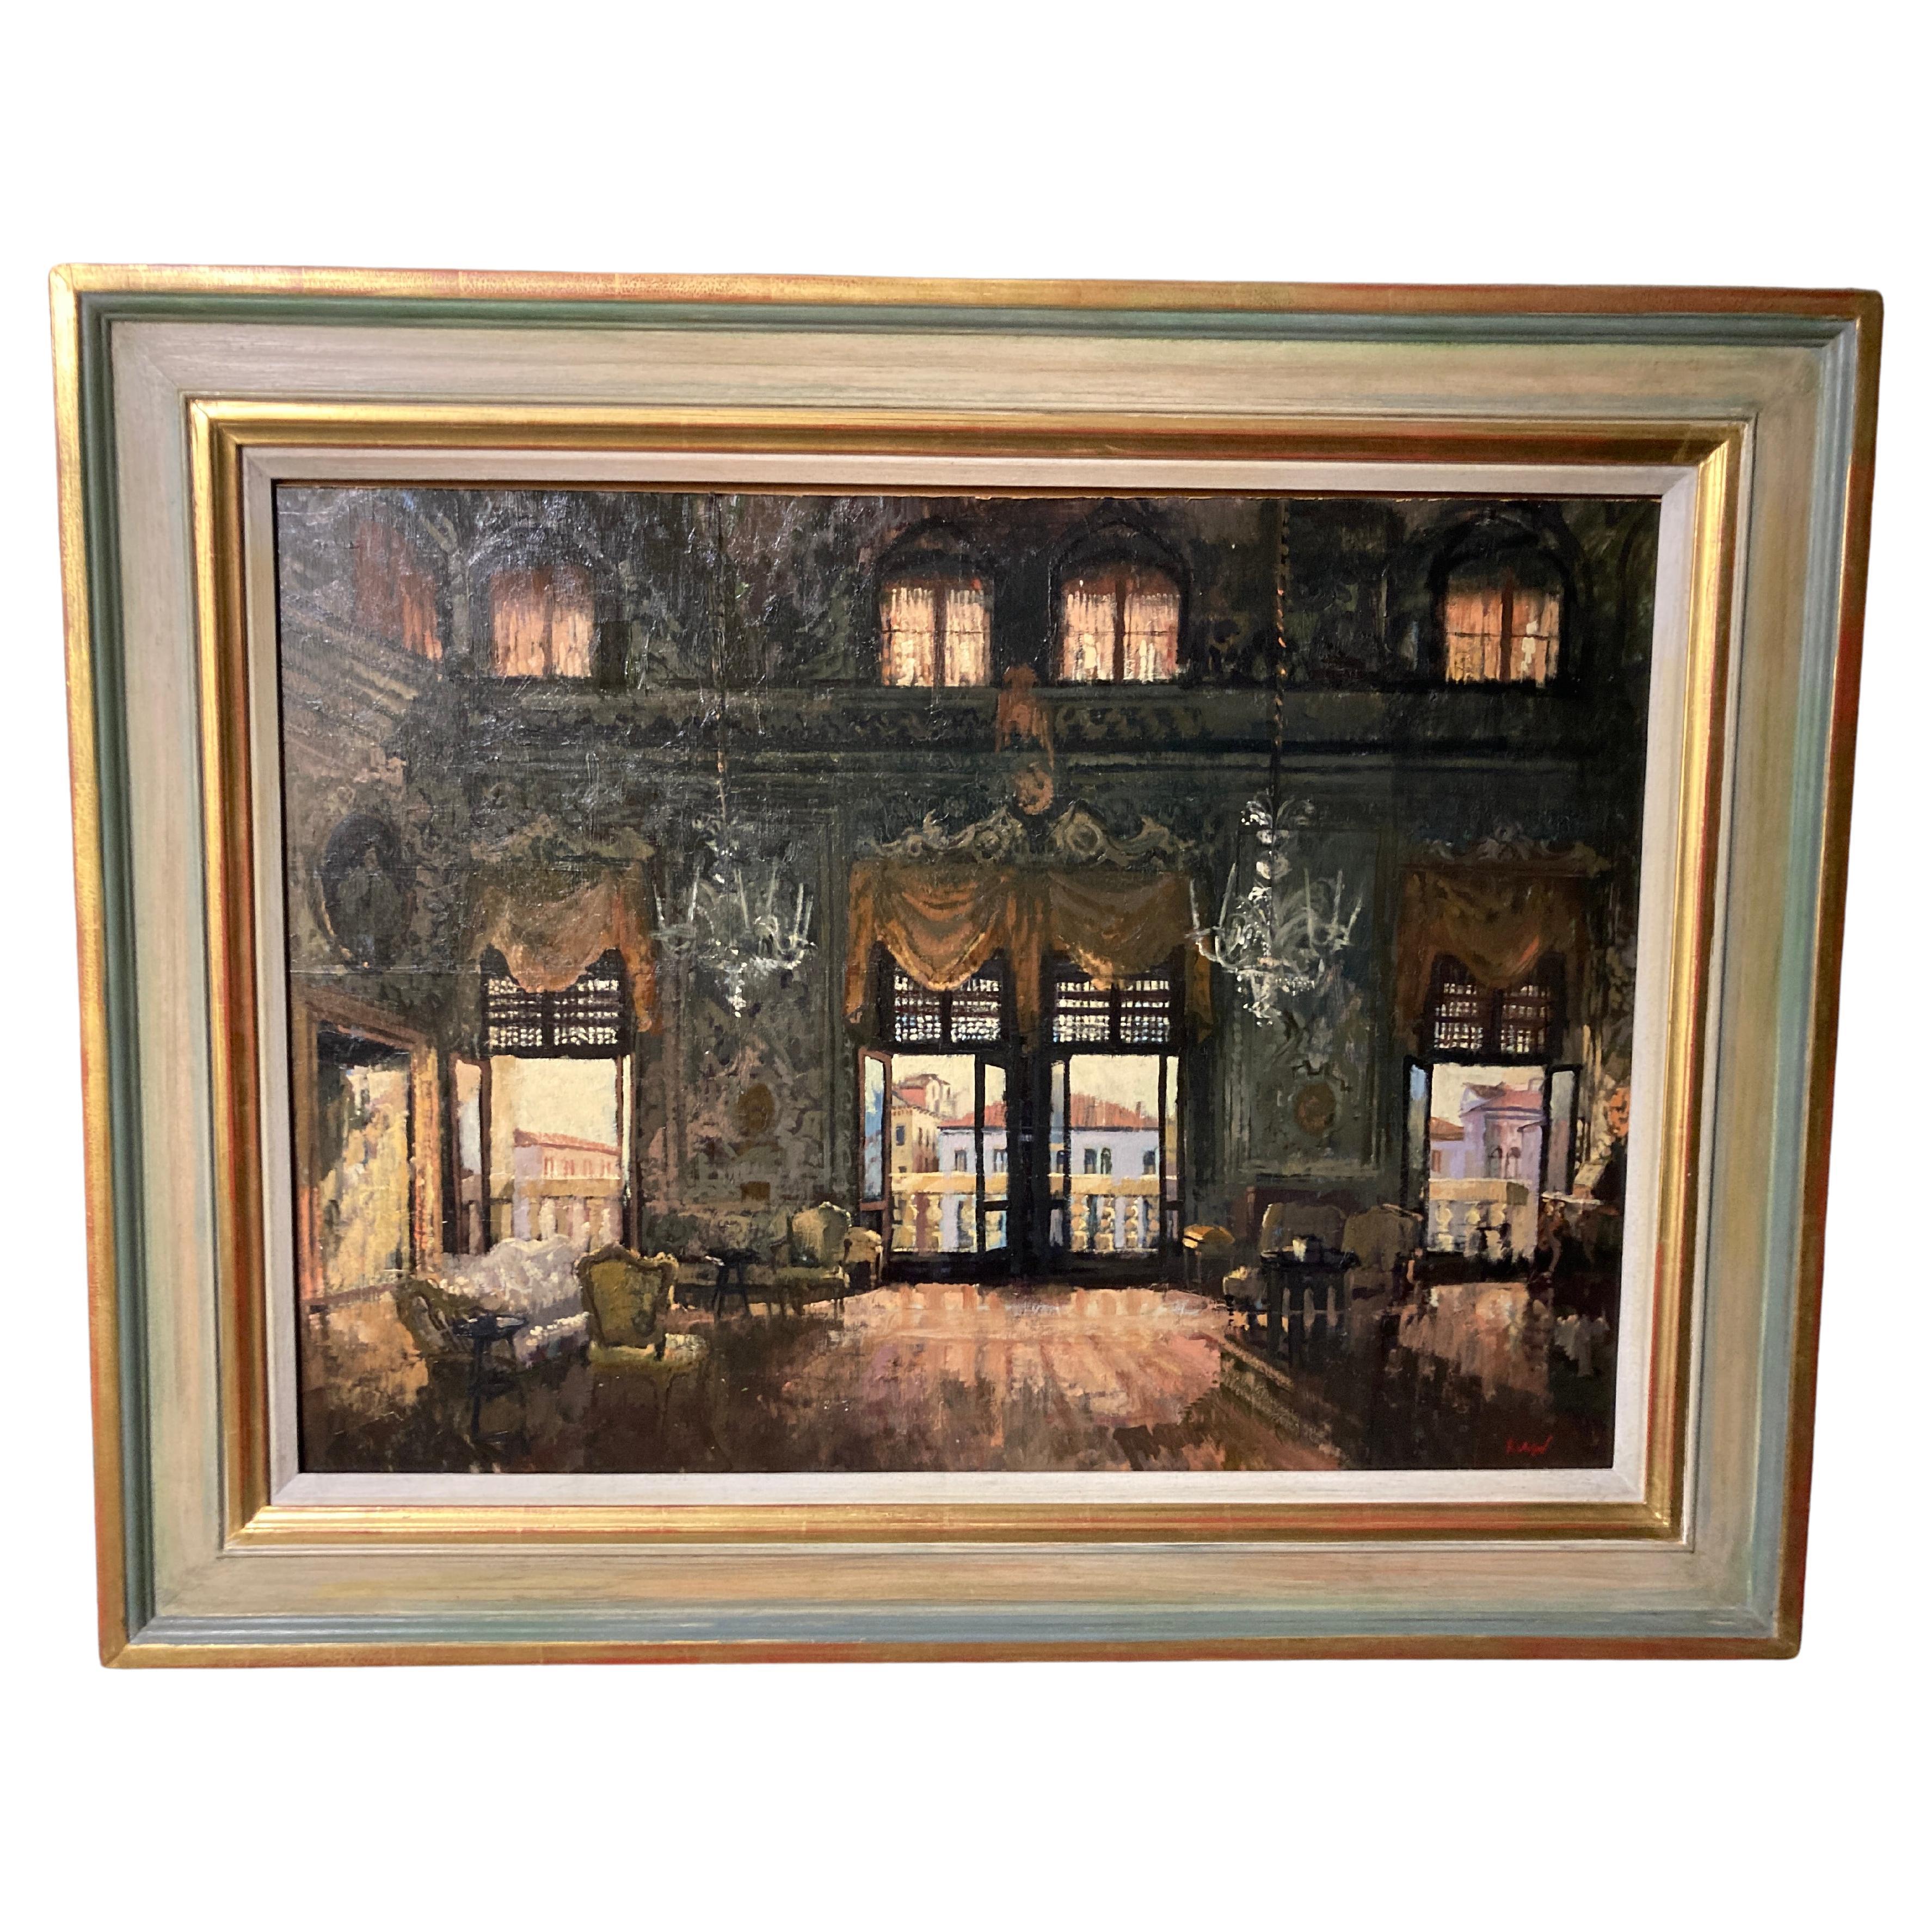 THE SALONE GRANDE, PALAZZO BARBARO, AFTERNOON by Peter Kuhfeld (b 1952) For Sale